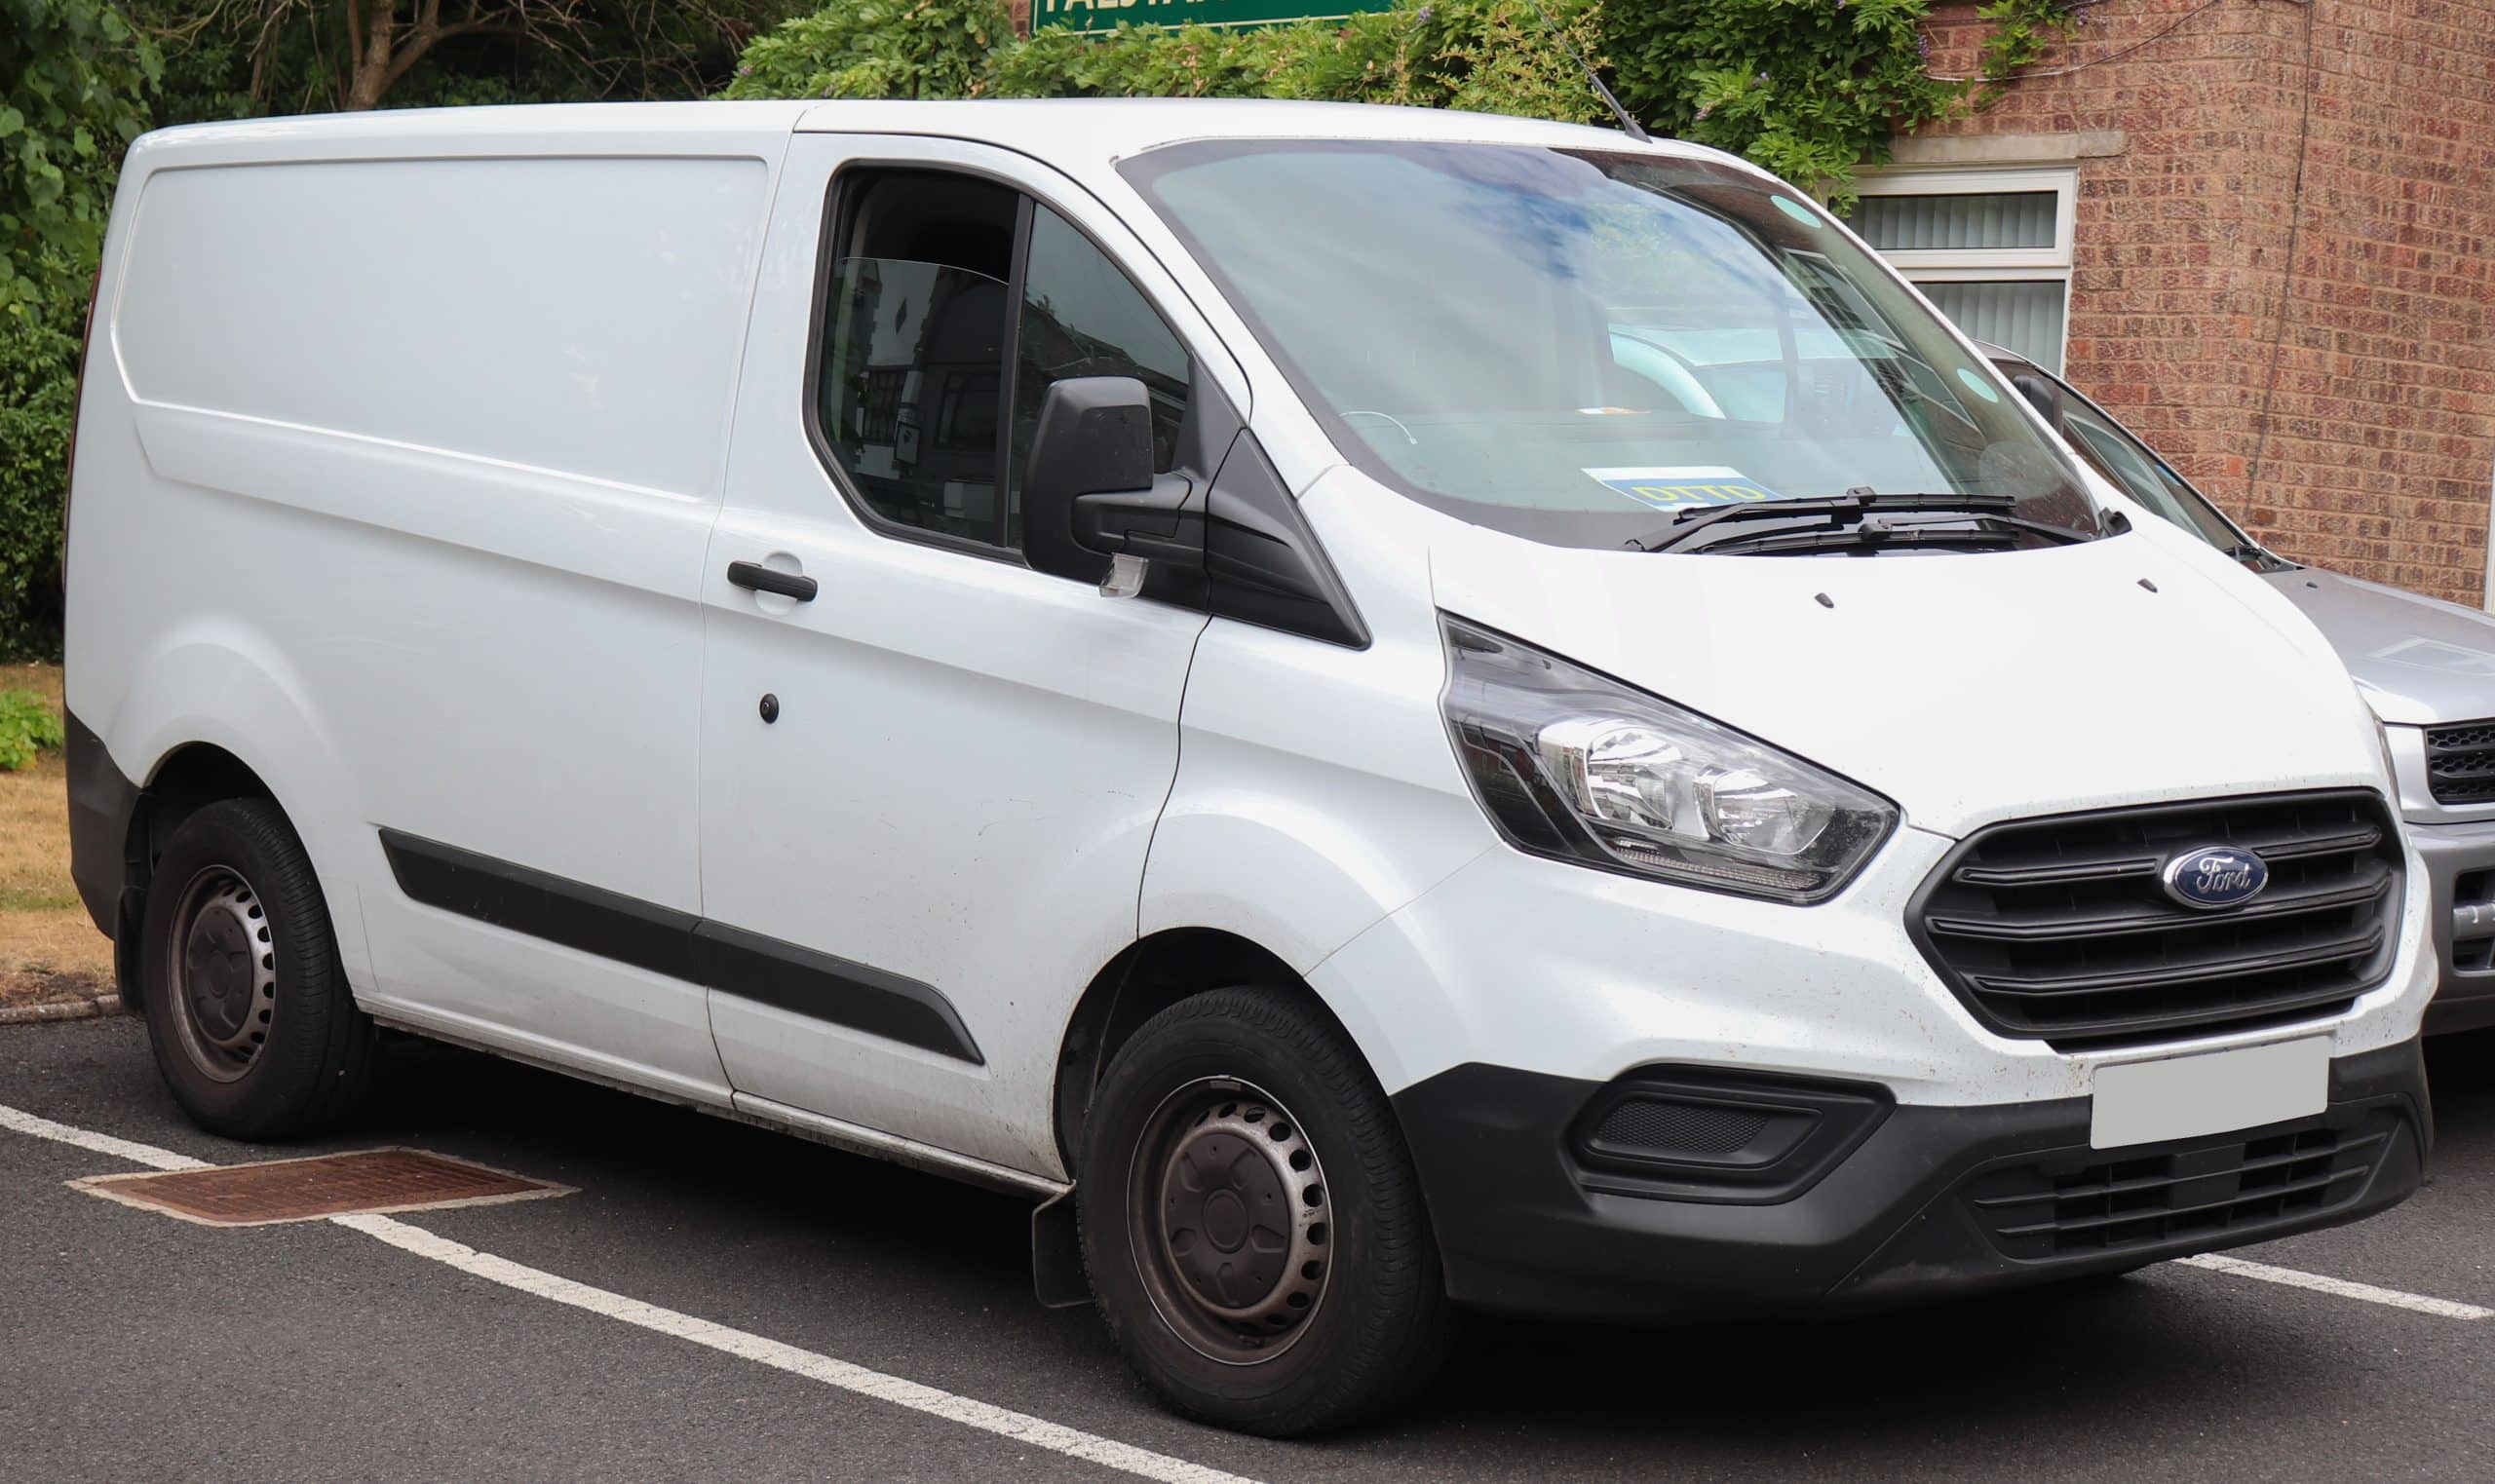 A white Ford commercial van parked at the roadside near a building with foliage in the background.